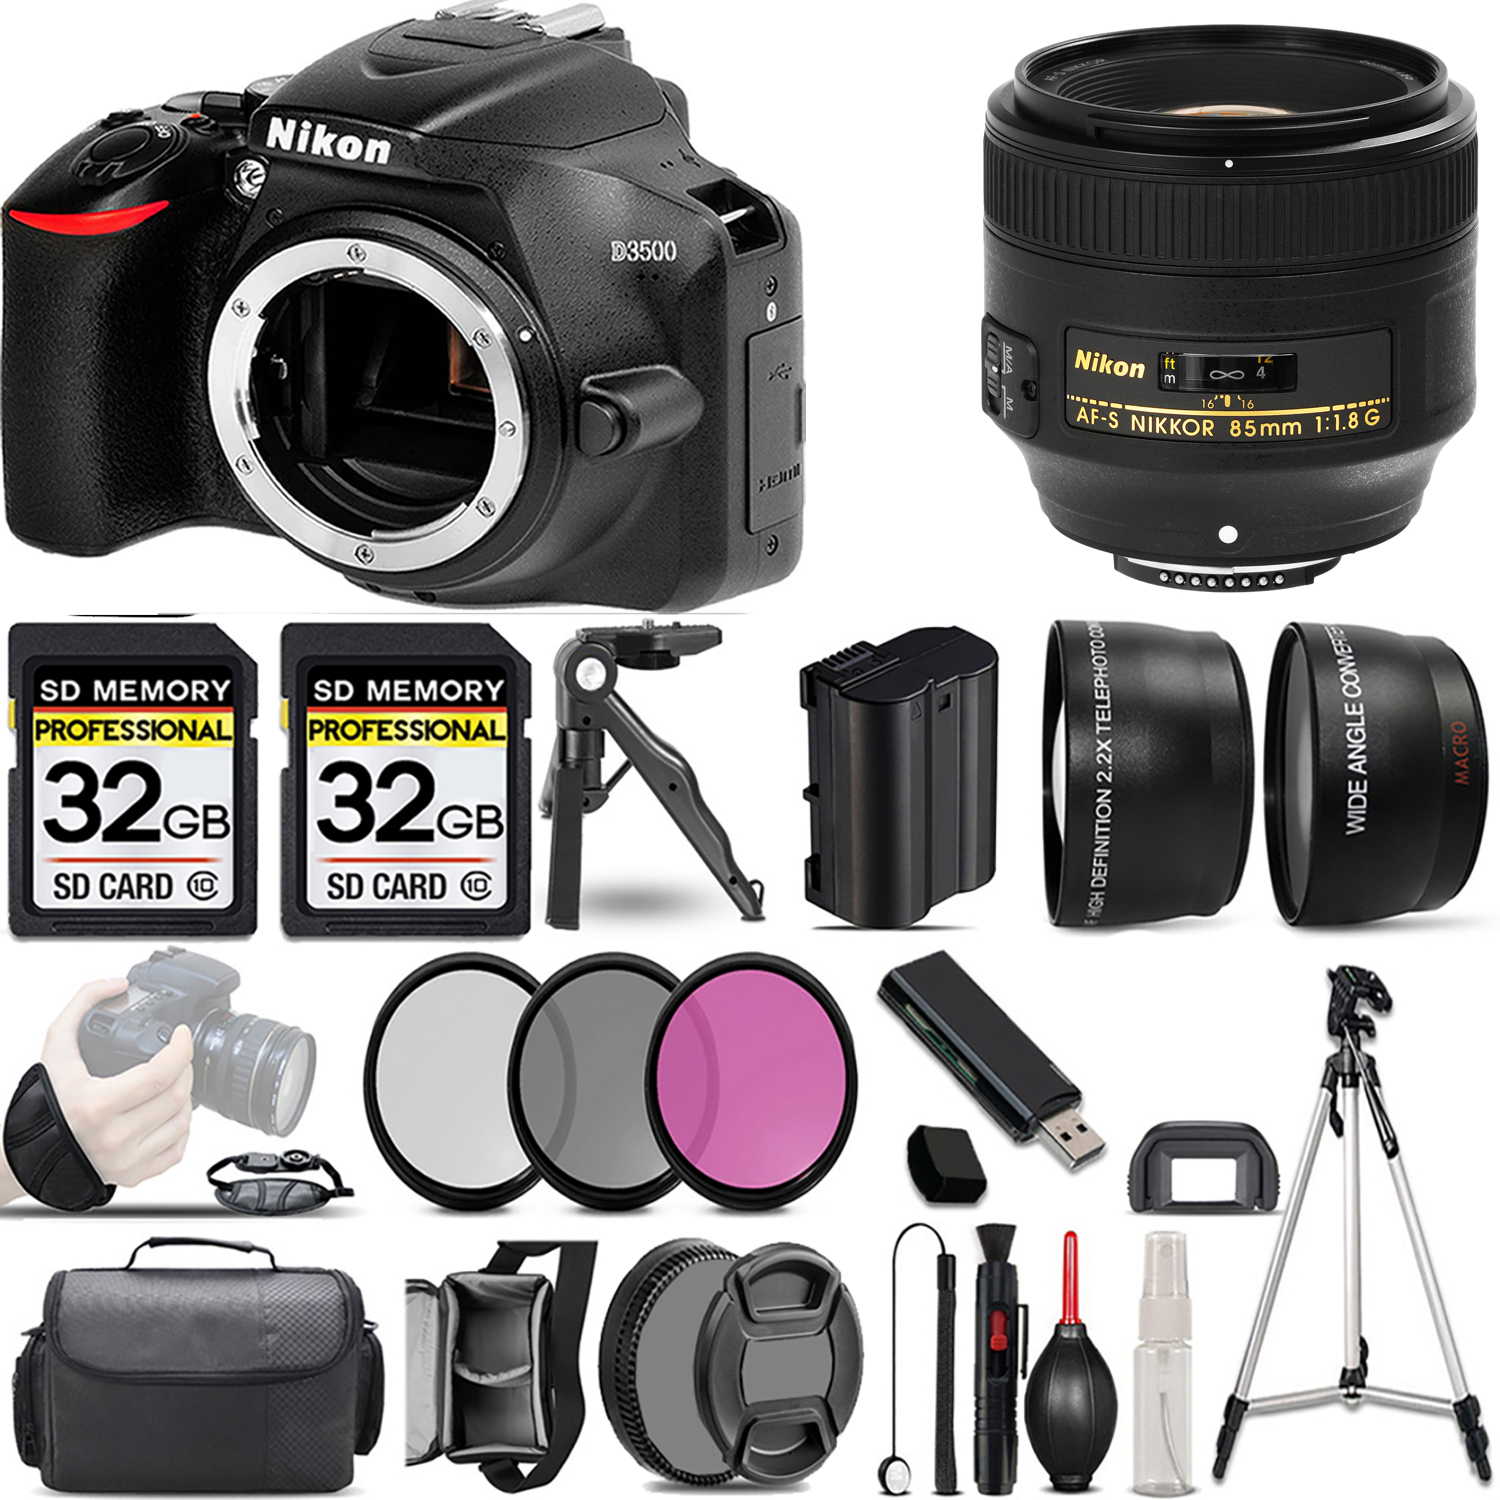 D3500 DSLR Camera (Body Only) + 85mm f/1.8G Lens + 3 Piece Filter Set + 64GB *FREE SHIPPING*